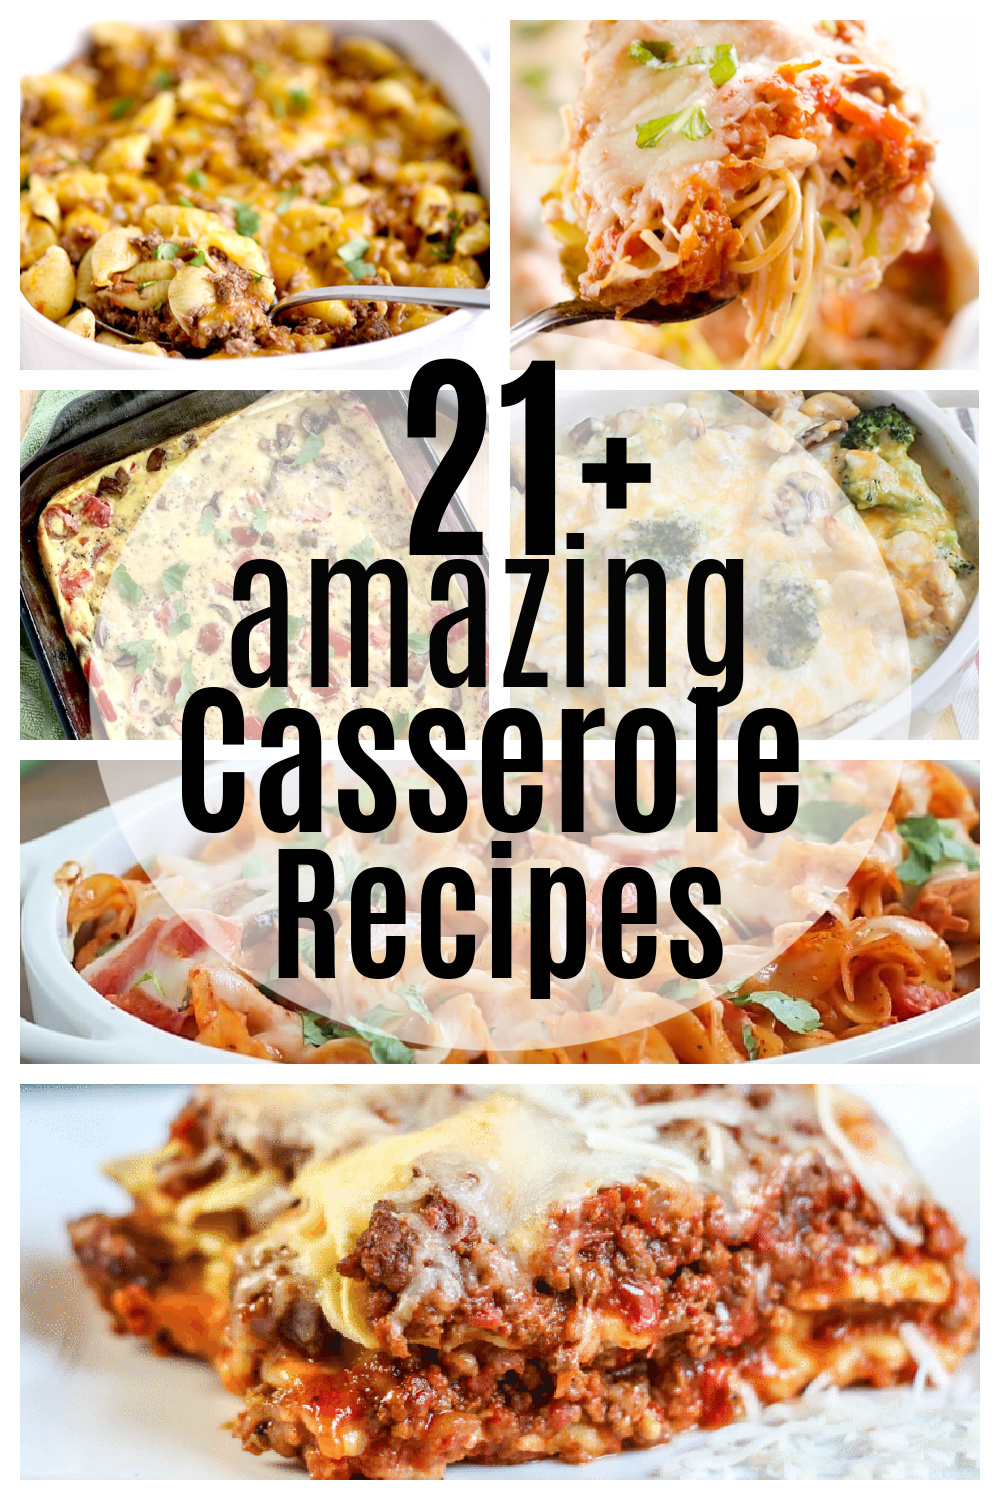 Check out these 21+ Casserole Recipes you're sure to LOVE! I don't know about you, but I love a good casserole and these are the best of the best! #casserole #easydinner #recipes #dinnerrecipe #easytofreeze #yummy #healthy #easy #yummyhealthyeasy via @jennikolaus